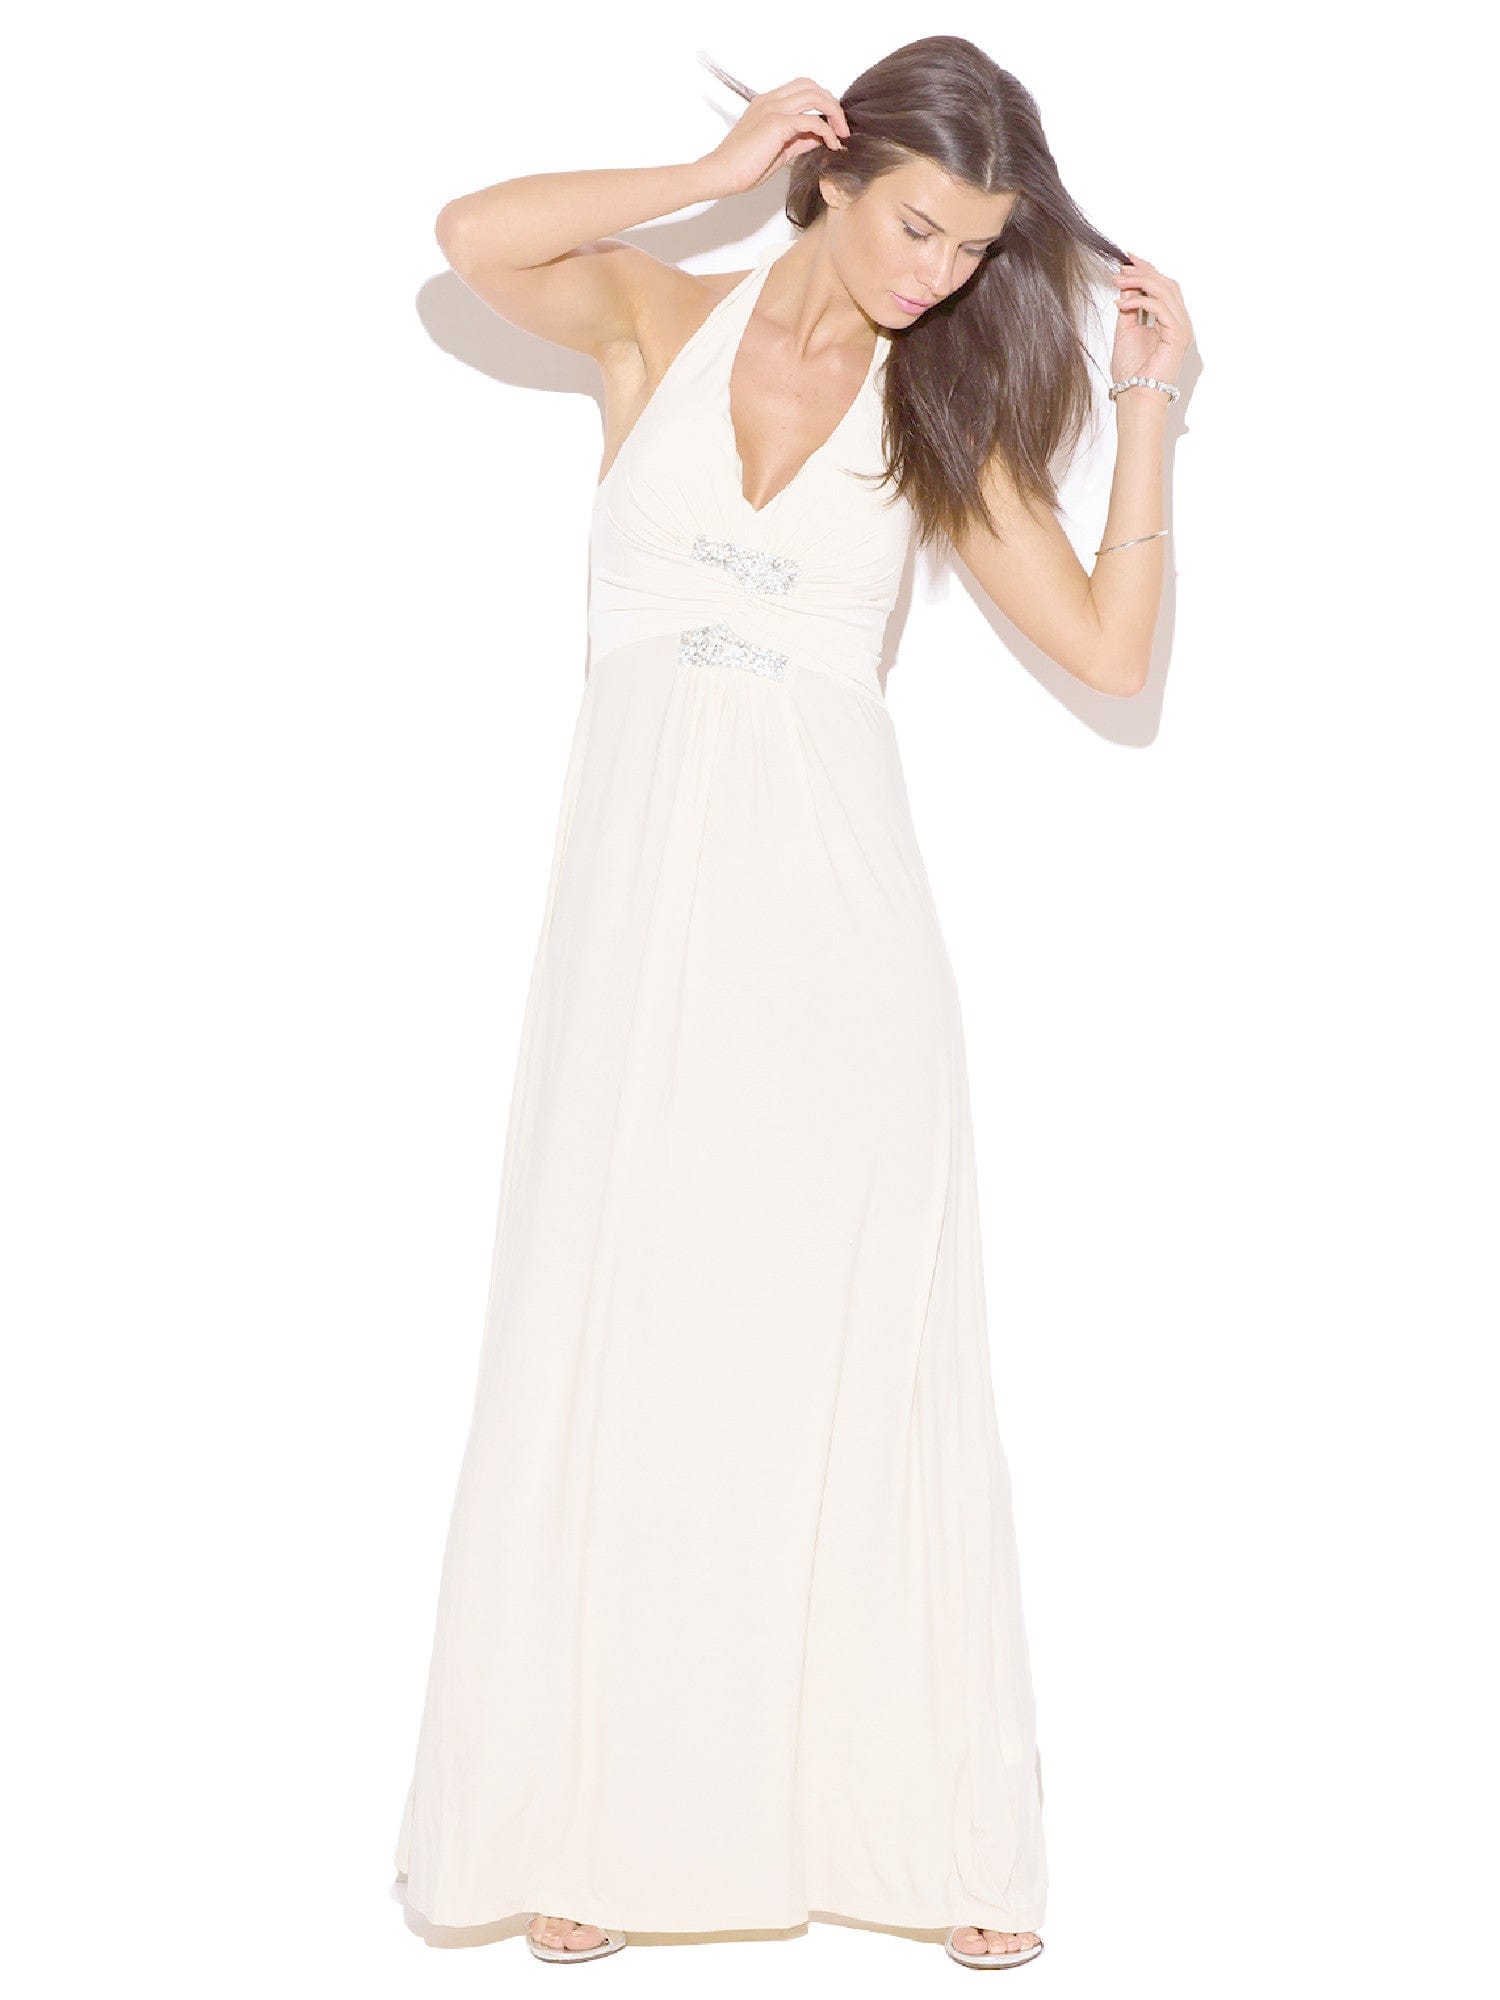 Women’s Ivory Halter Empire Waist Party Evening Maxi Dress Dresses A Moment Of Now Women’s Boutique Clothing Online Lifestyle Store